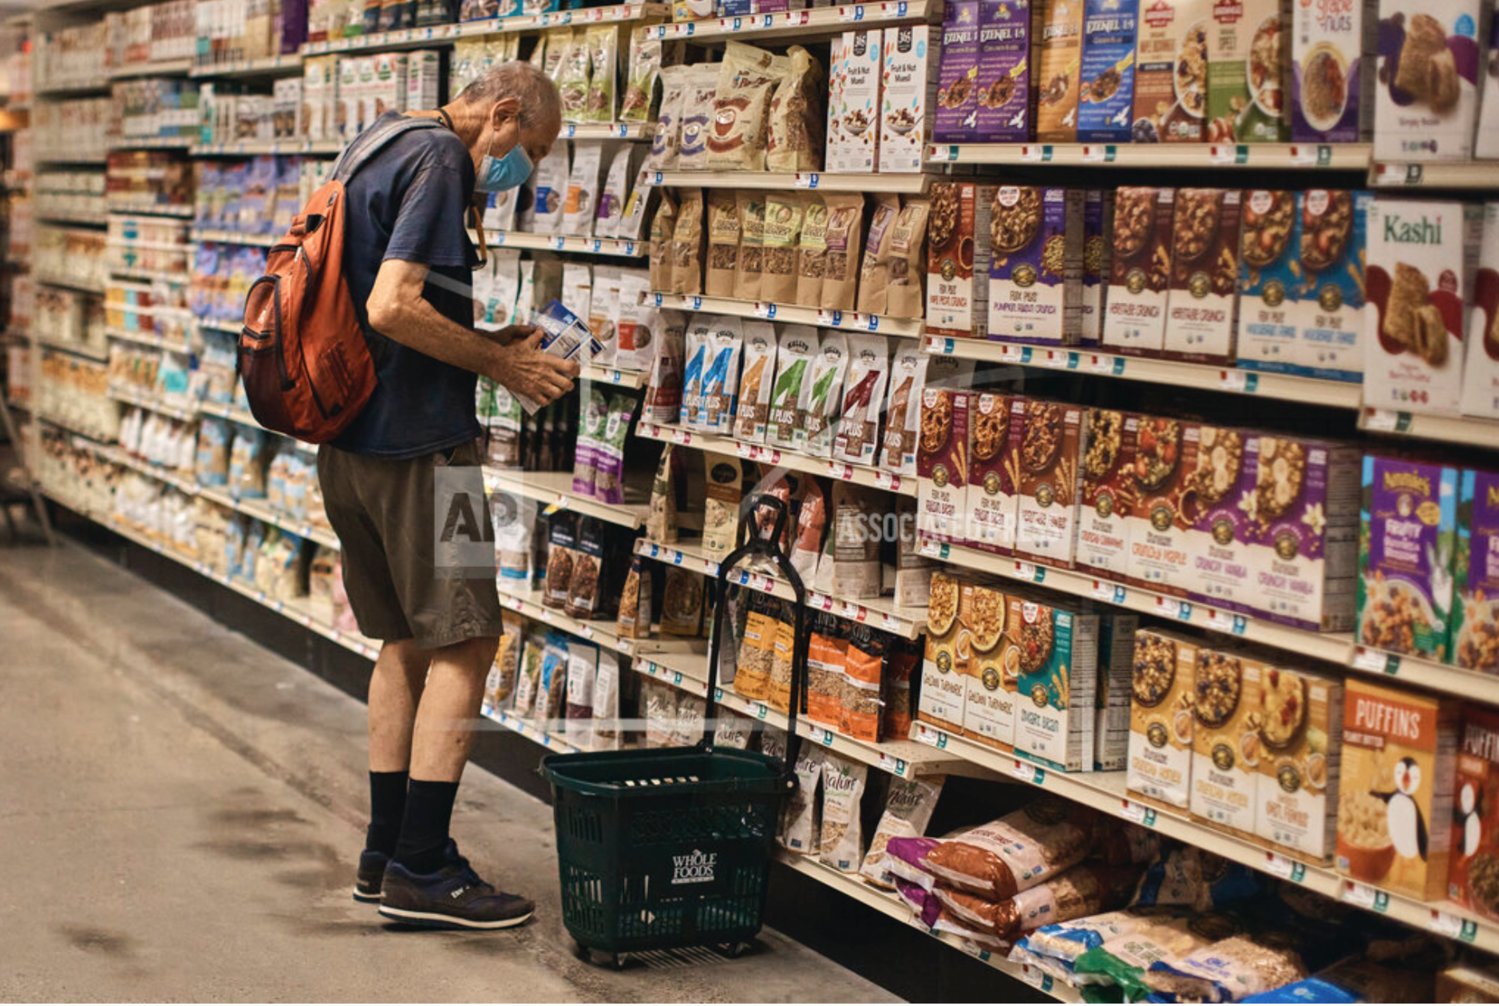 A man shops at a supermarket on Wednesday, July 27, 2022, in New York. The U.S. economy shrank from April through June for a second straight quarter, contracting at a 0.9% annual pace. The move has many consumers taking steps to cut costs amid concerns over their personal finances.